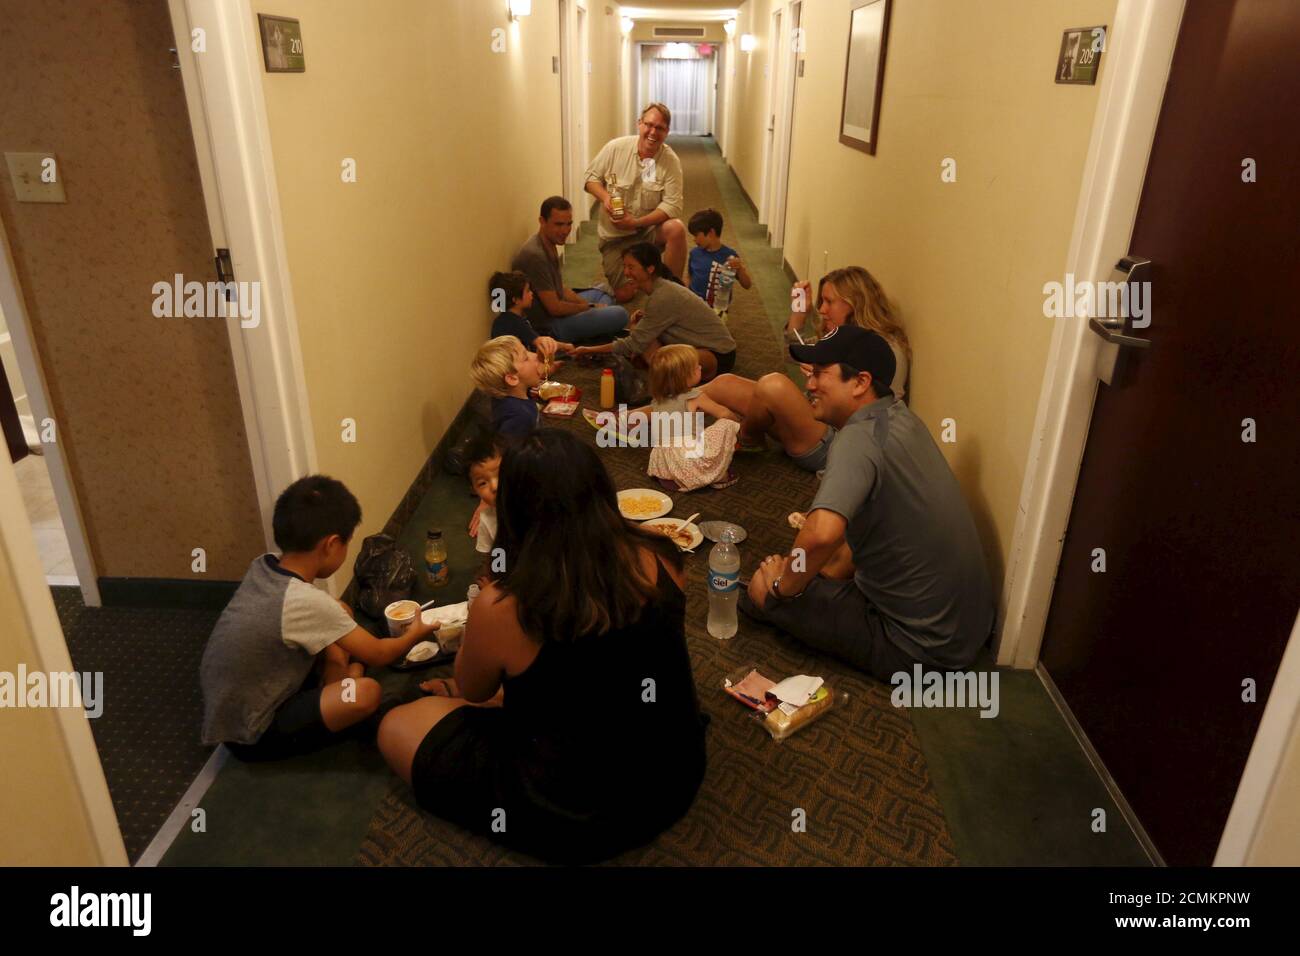 Tourists who arrived from Puerto Vallarta eat in a corridor of a hotel in Guadalajara, Mexico October 23, 2015. Hurricane Patricia, one of the most powerful storms on record, struck Mexico's Pacific coast on Friday with destructive winds that tore down trees, moved cars and forced thousands of people to flee homes and beachfront resorts. With winds of 160 miles per hour (266 km per hour), the Category 5 hurricane had western Mexico on high alert, with the popular resort of Puerto Vallarta and others on the coast opening emergency shelters as hotels were closed. REUTERS/Edgard Garrido Stock Photo